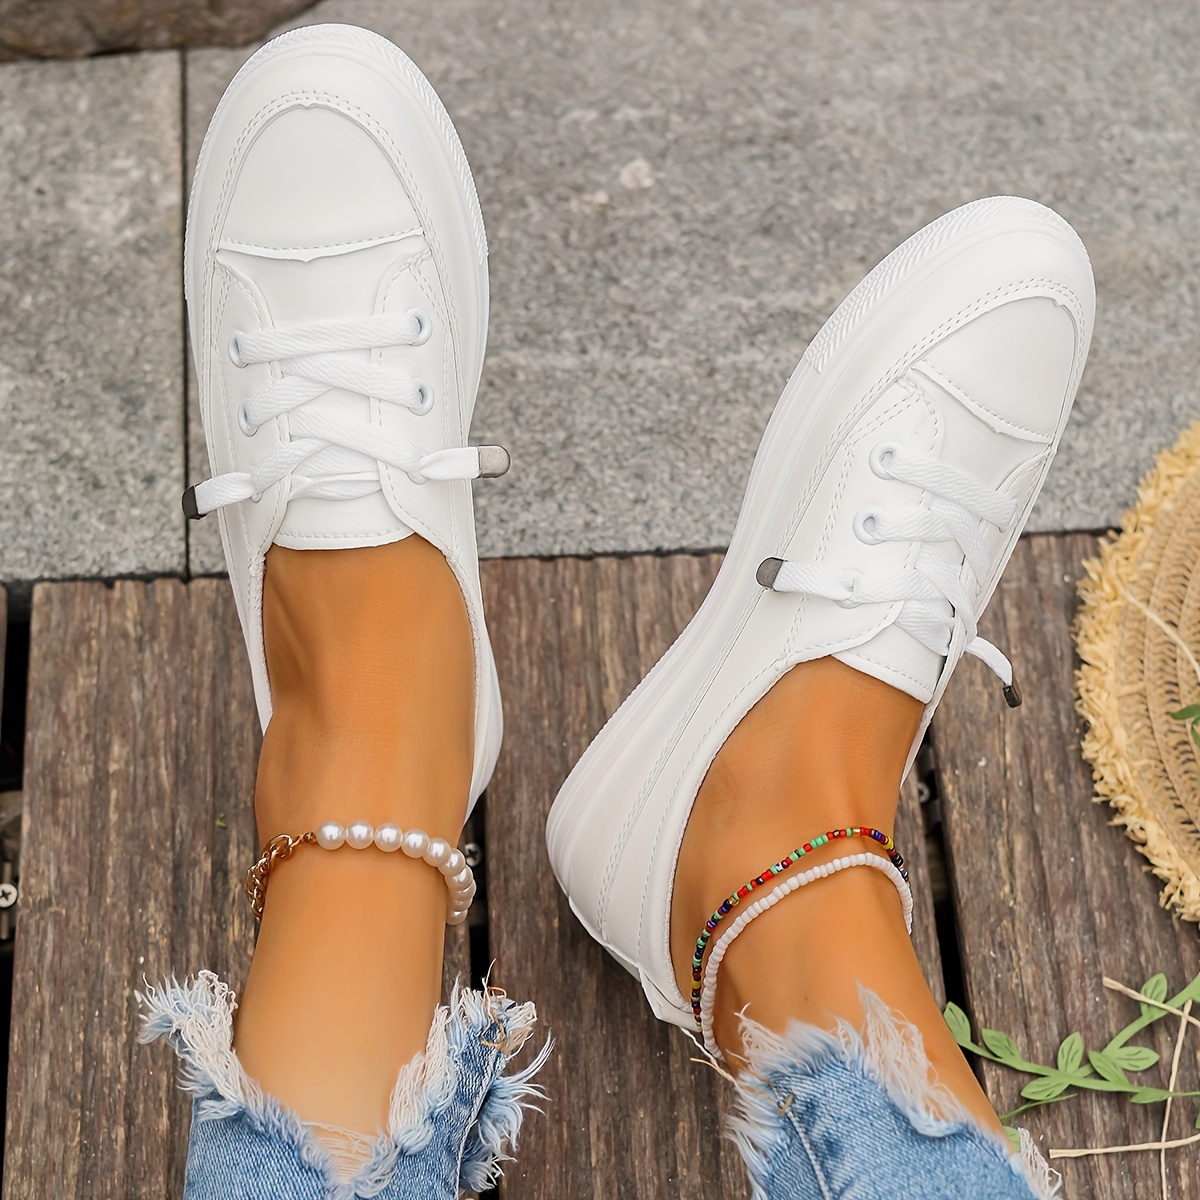 white skate shoes women s casual low top slip flat shoes details 5